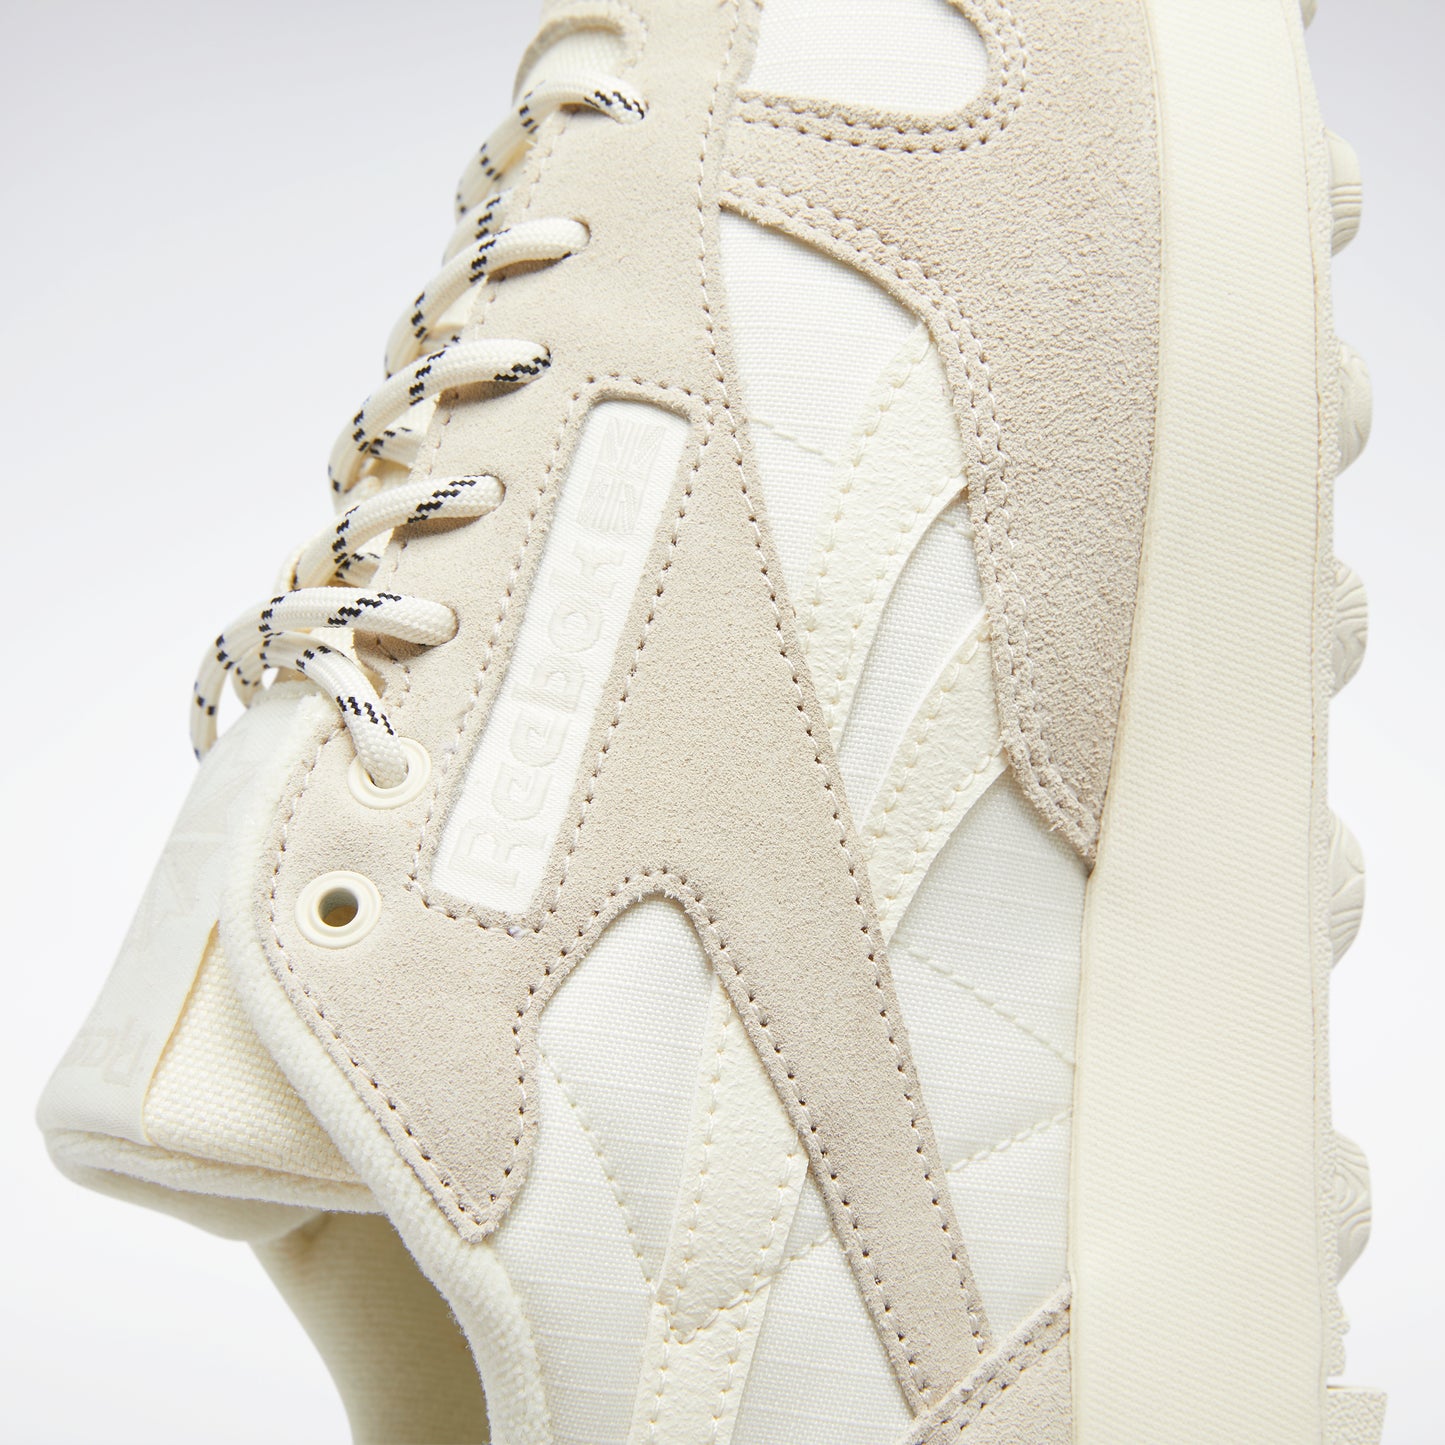 Classic Leather Shoes - White / Chalk / Stucco